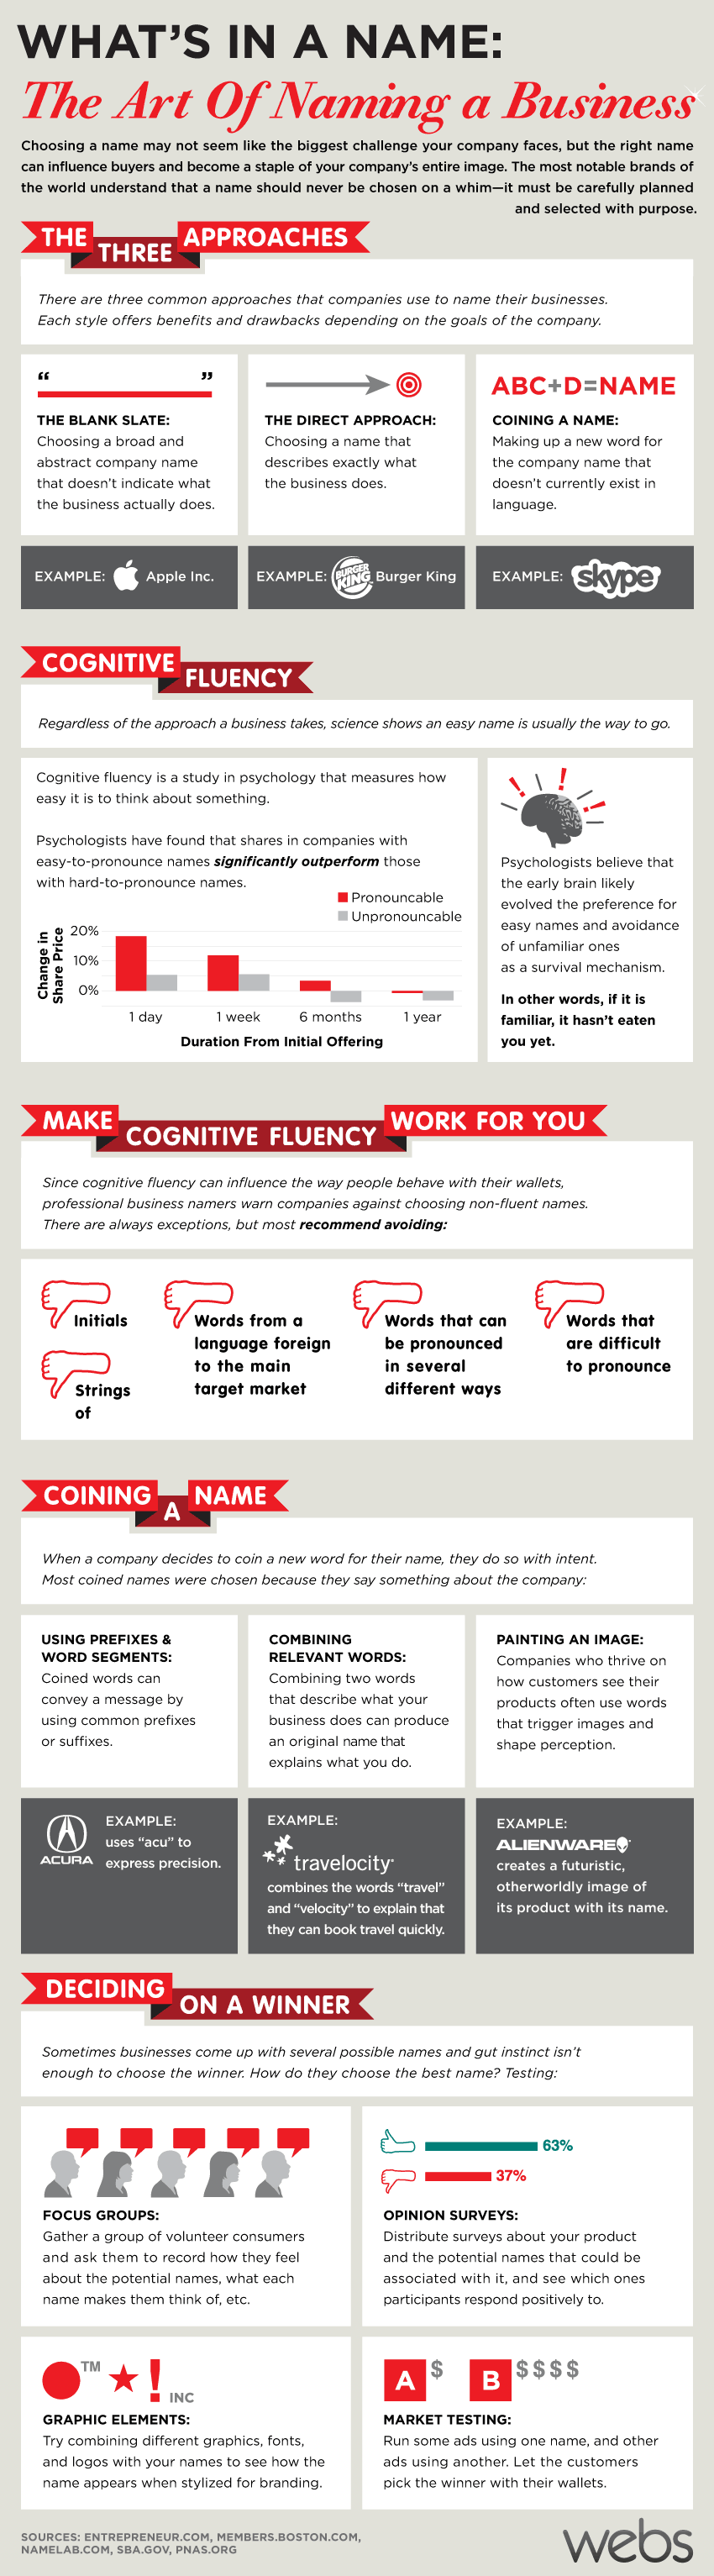 Infographic - The Art of Naming a Business